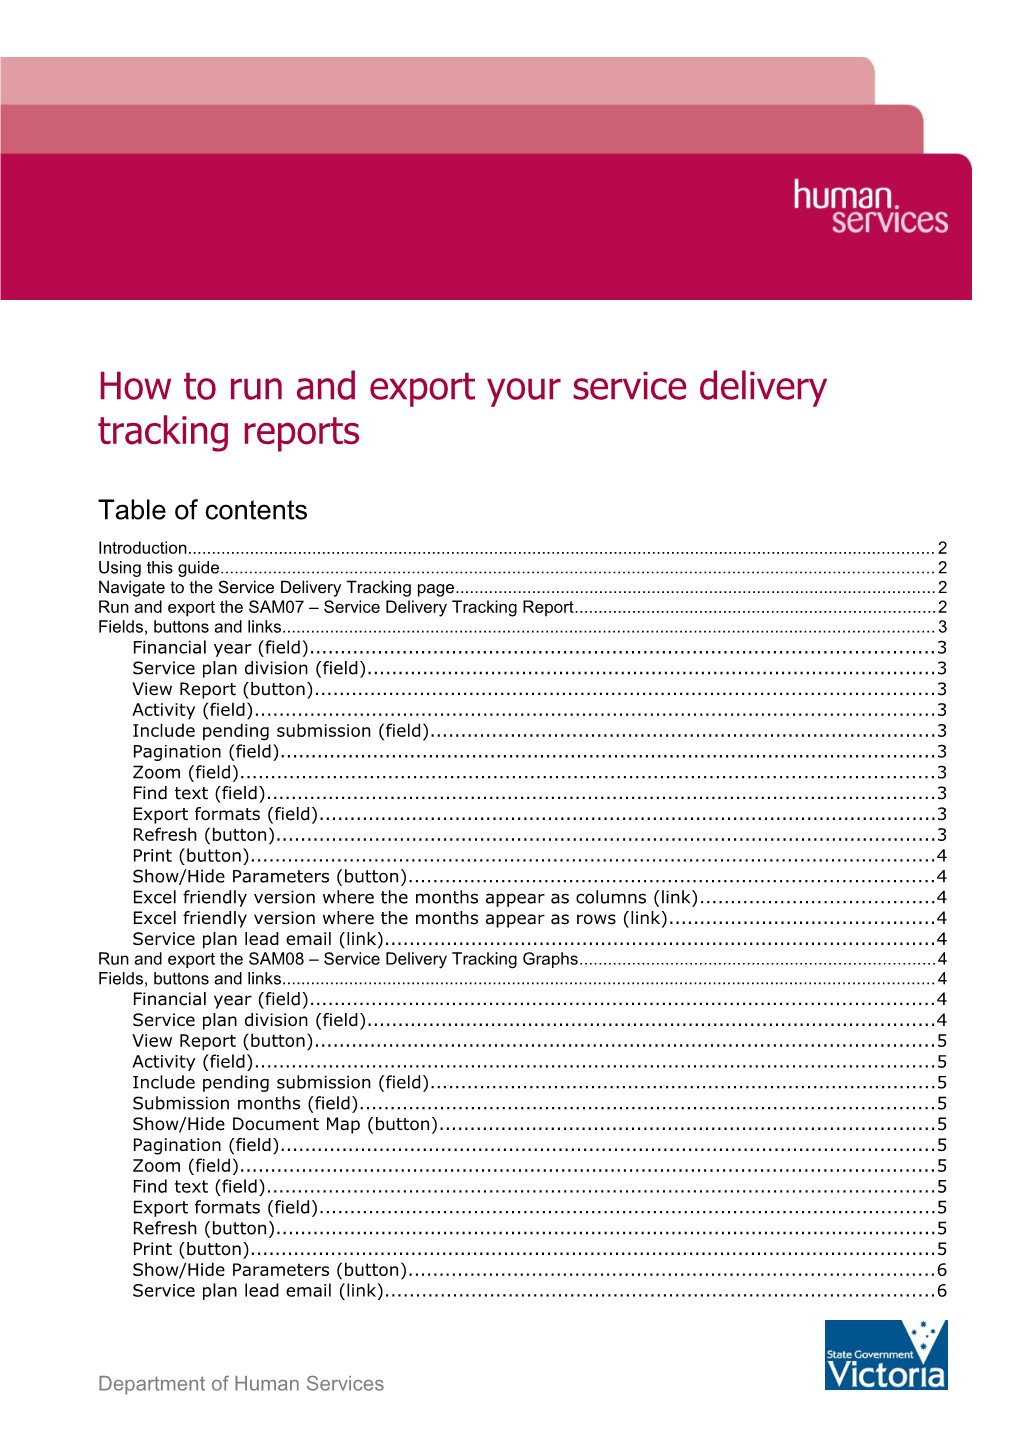 How to Run and Export Your Service Delivery Tracking Reports